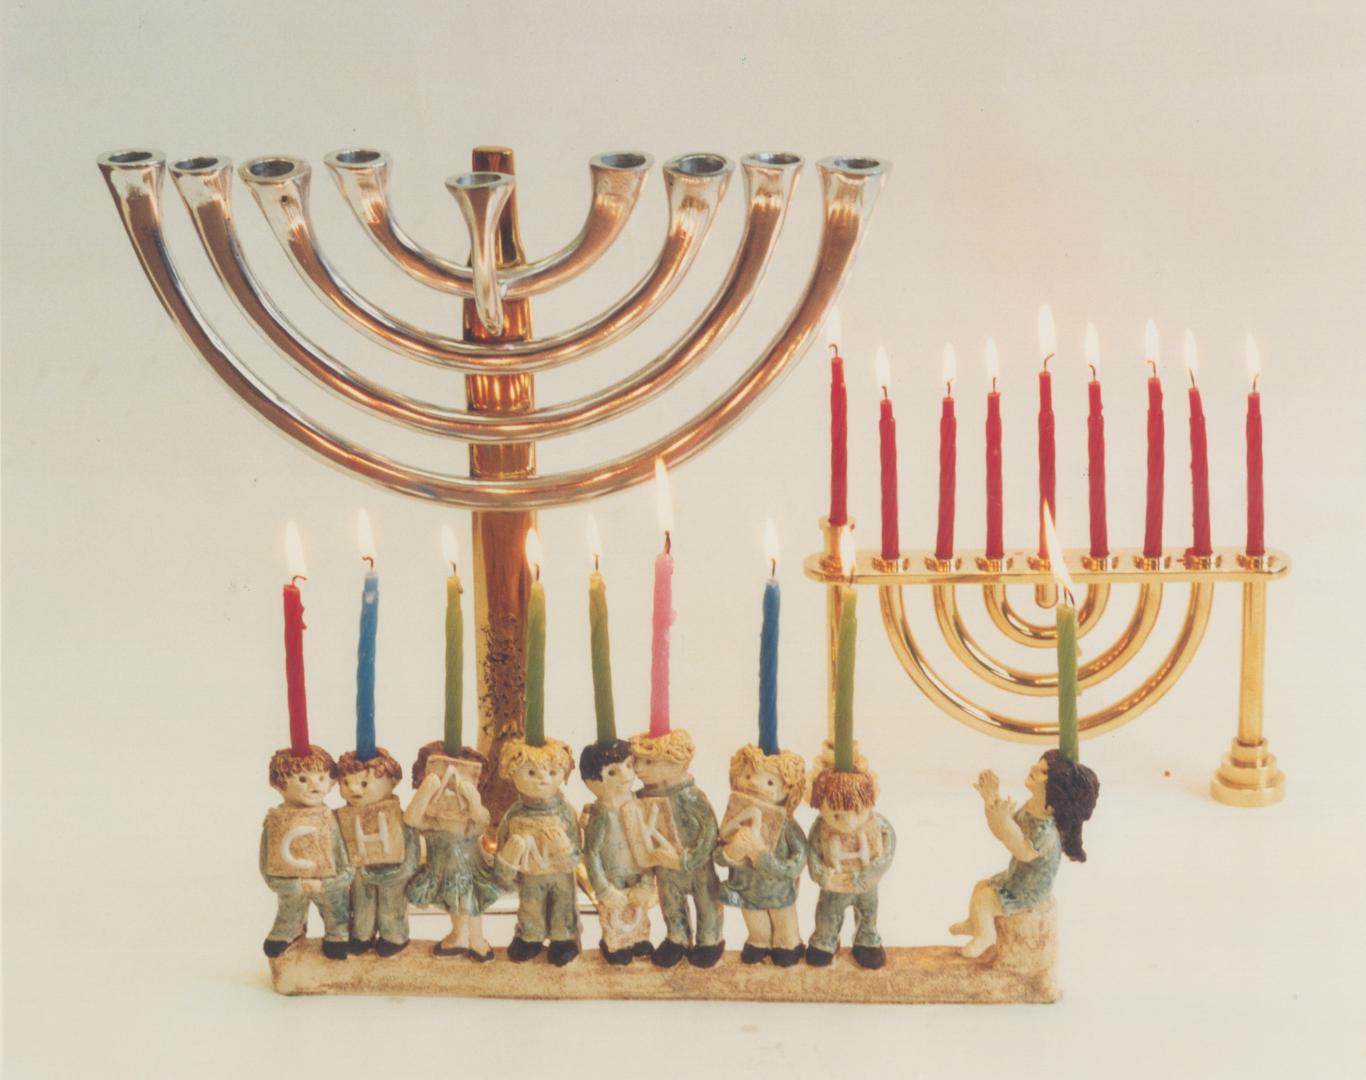 The Chanukah menorah is taking on a new look